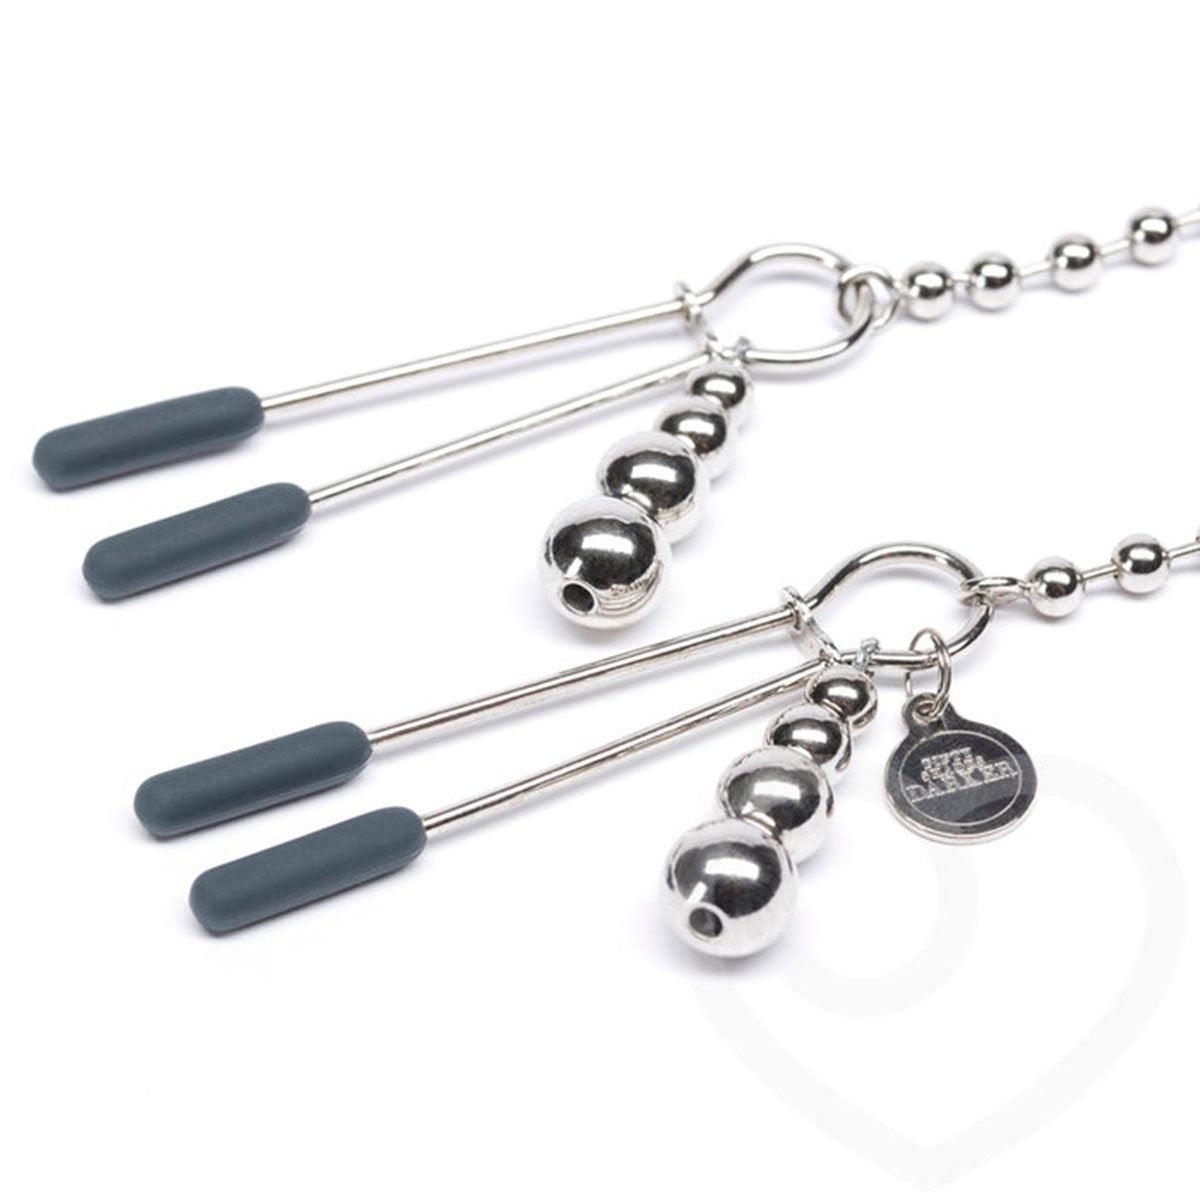 Fifty Shades Darker - At My Mercy Chained Nipple Clamps - shop enby